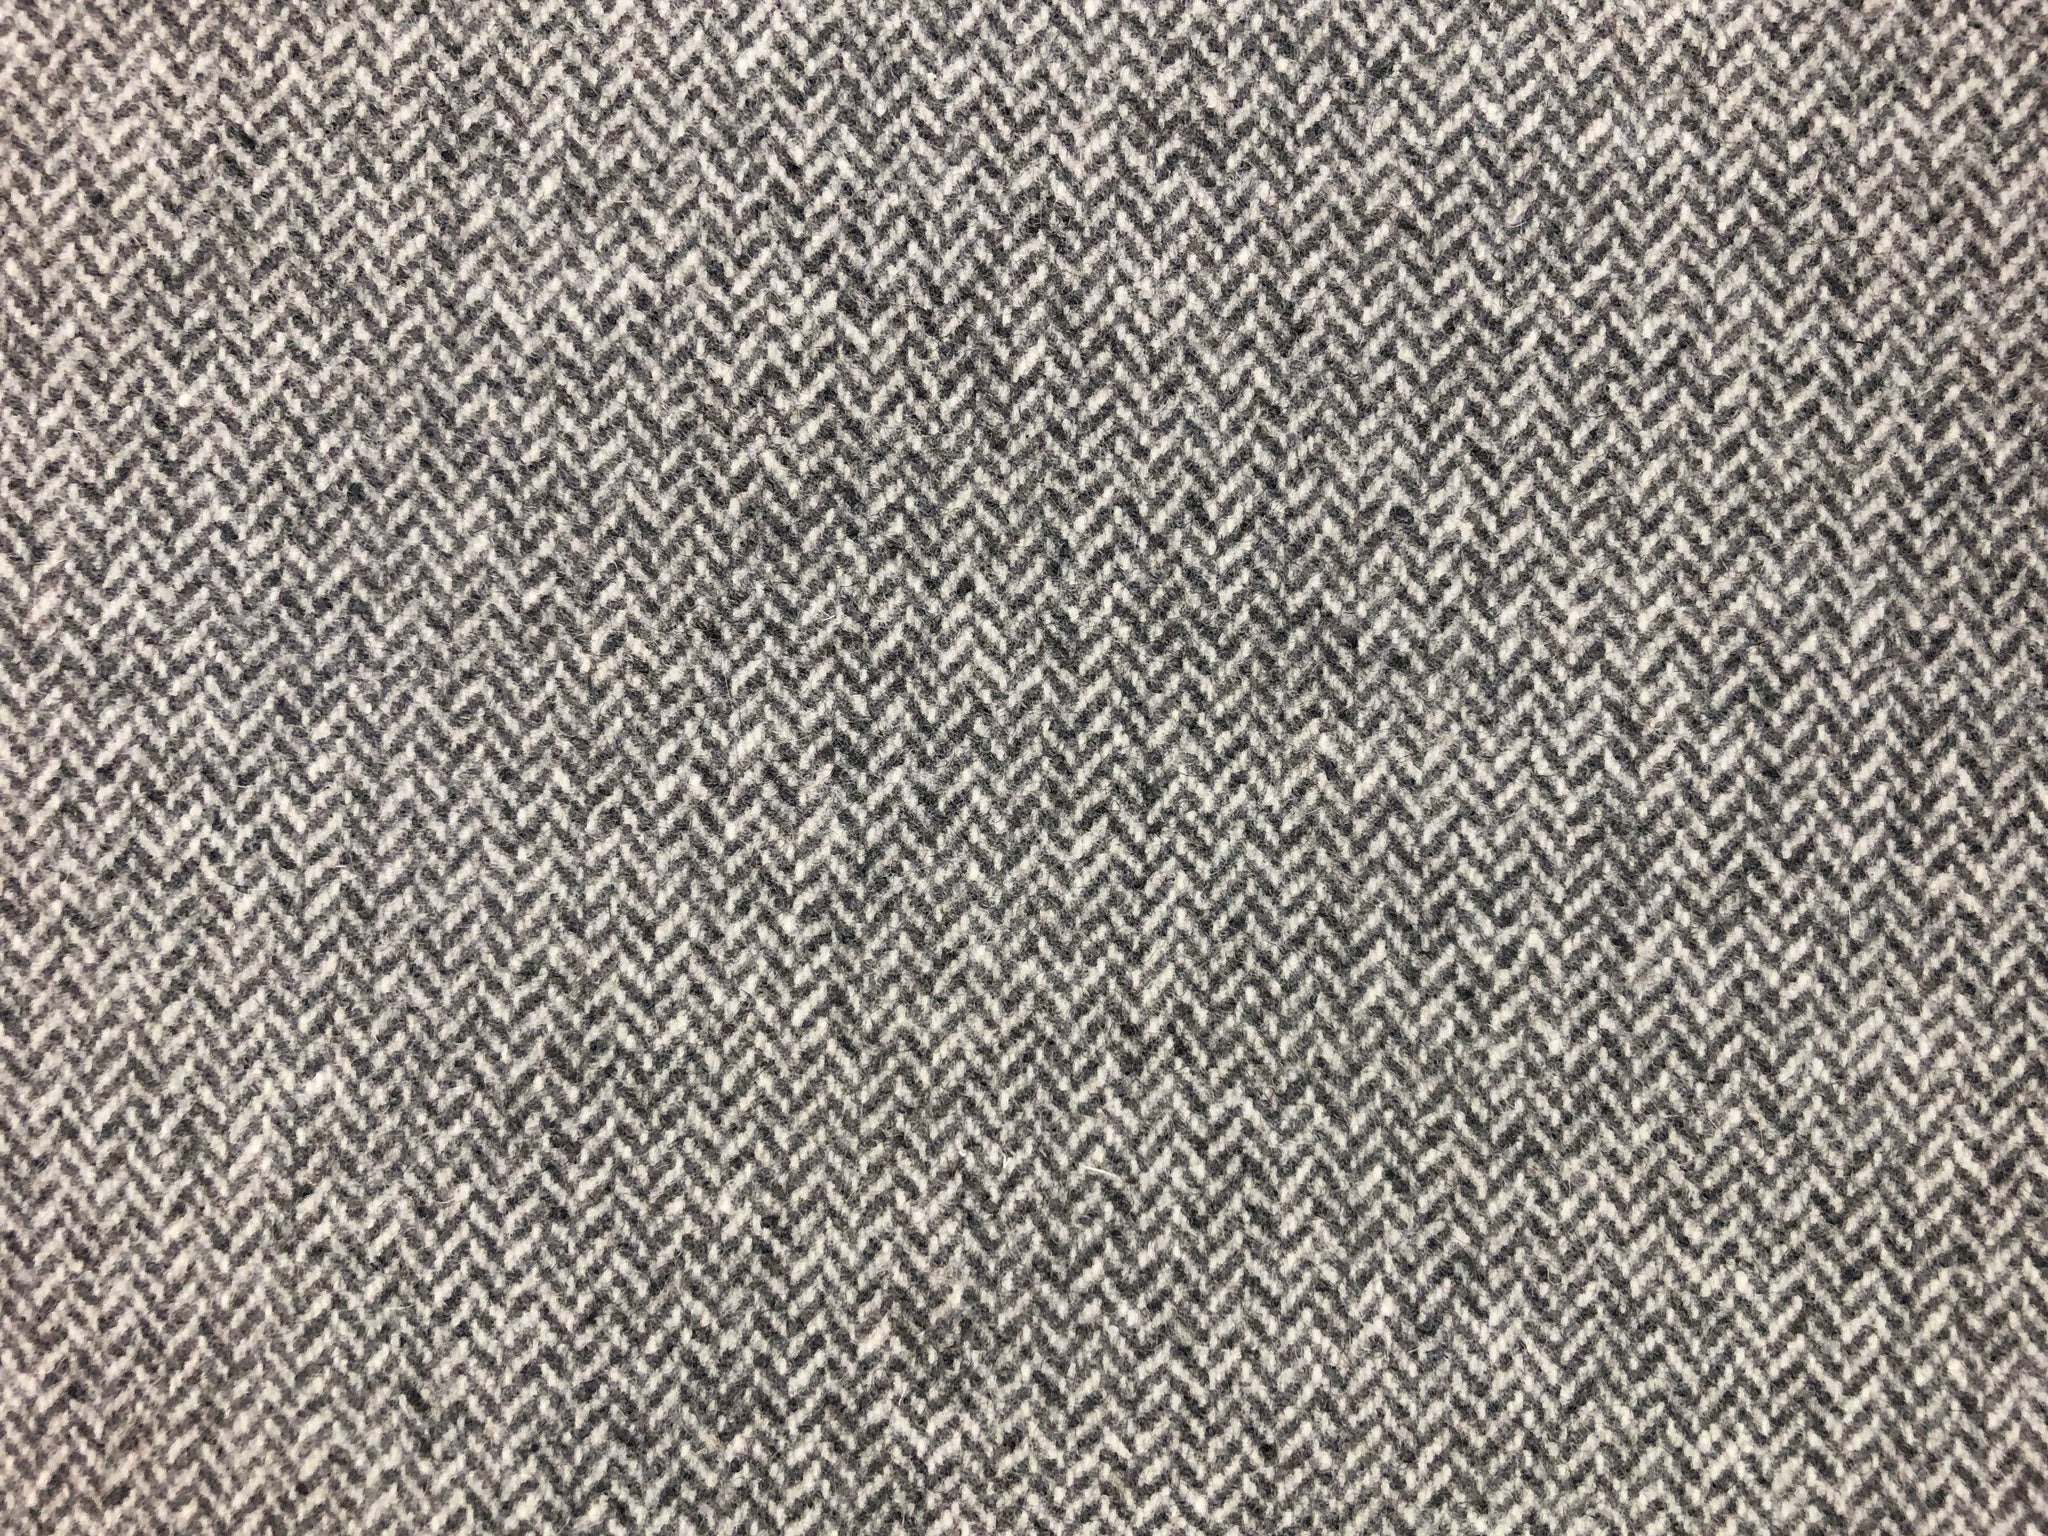 Wessex Charcoal Fabric - Andrew Martin